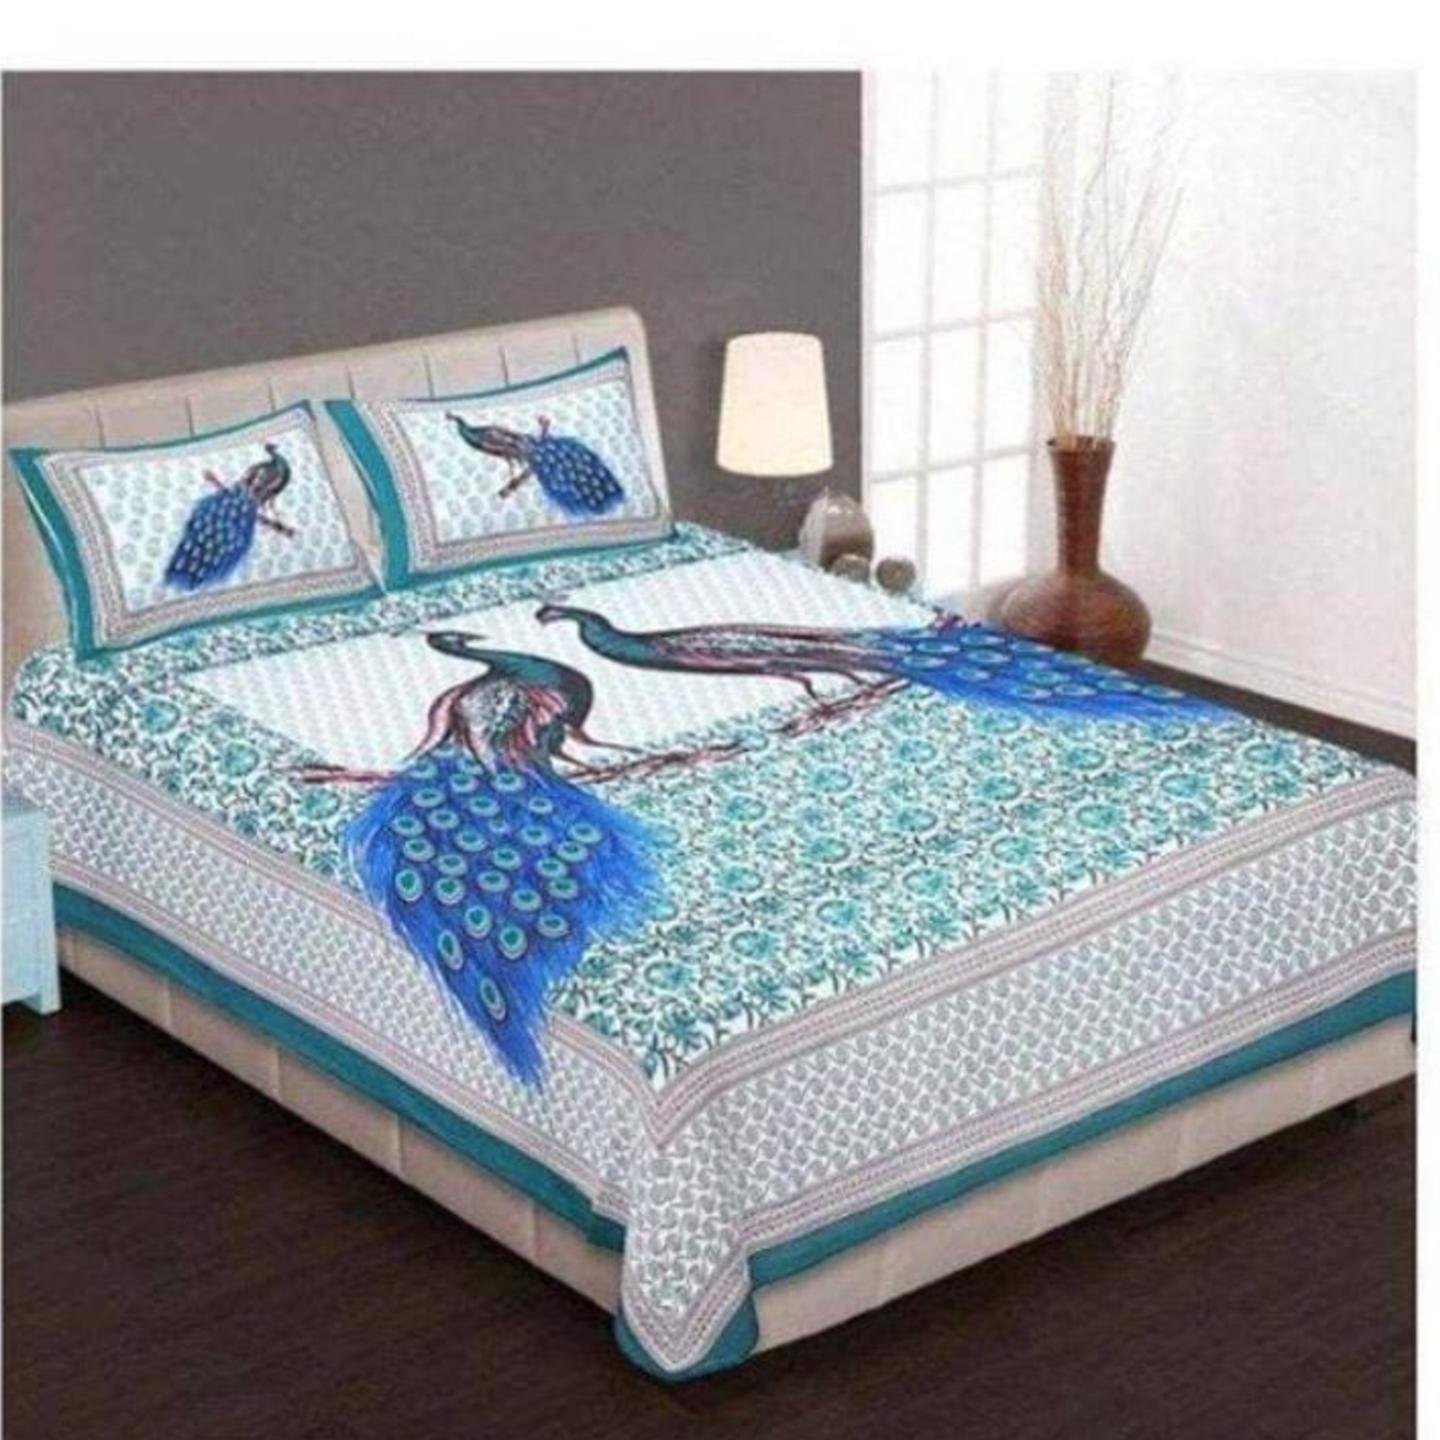 Handtex Home Cotton Rajasthani Jaipuri Traditional Peacock Printed Double Bed Bedsheet with 2 Pillow Covers 